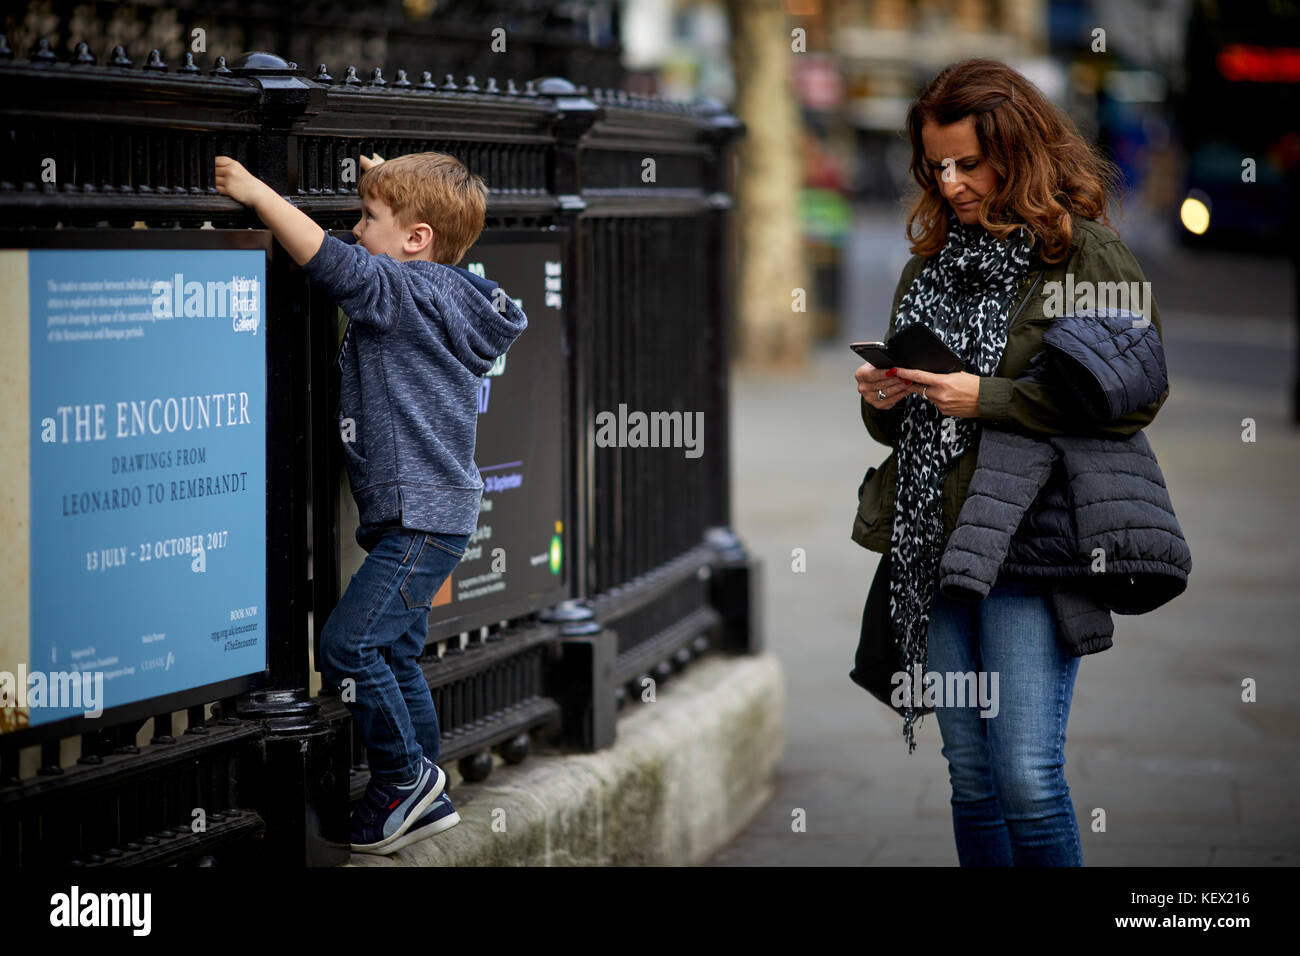 Mum texting as child plays on railings National Portrait Gallery in London the capital city of England Stock Photo